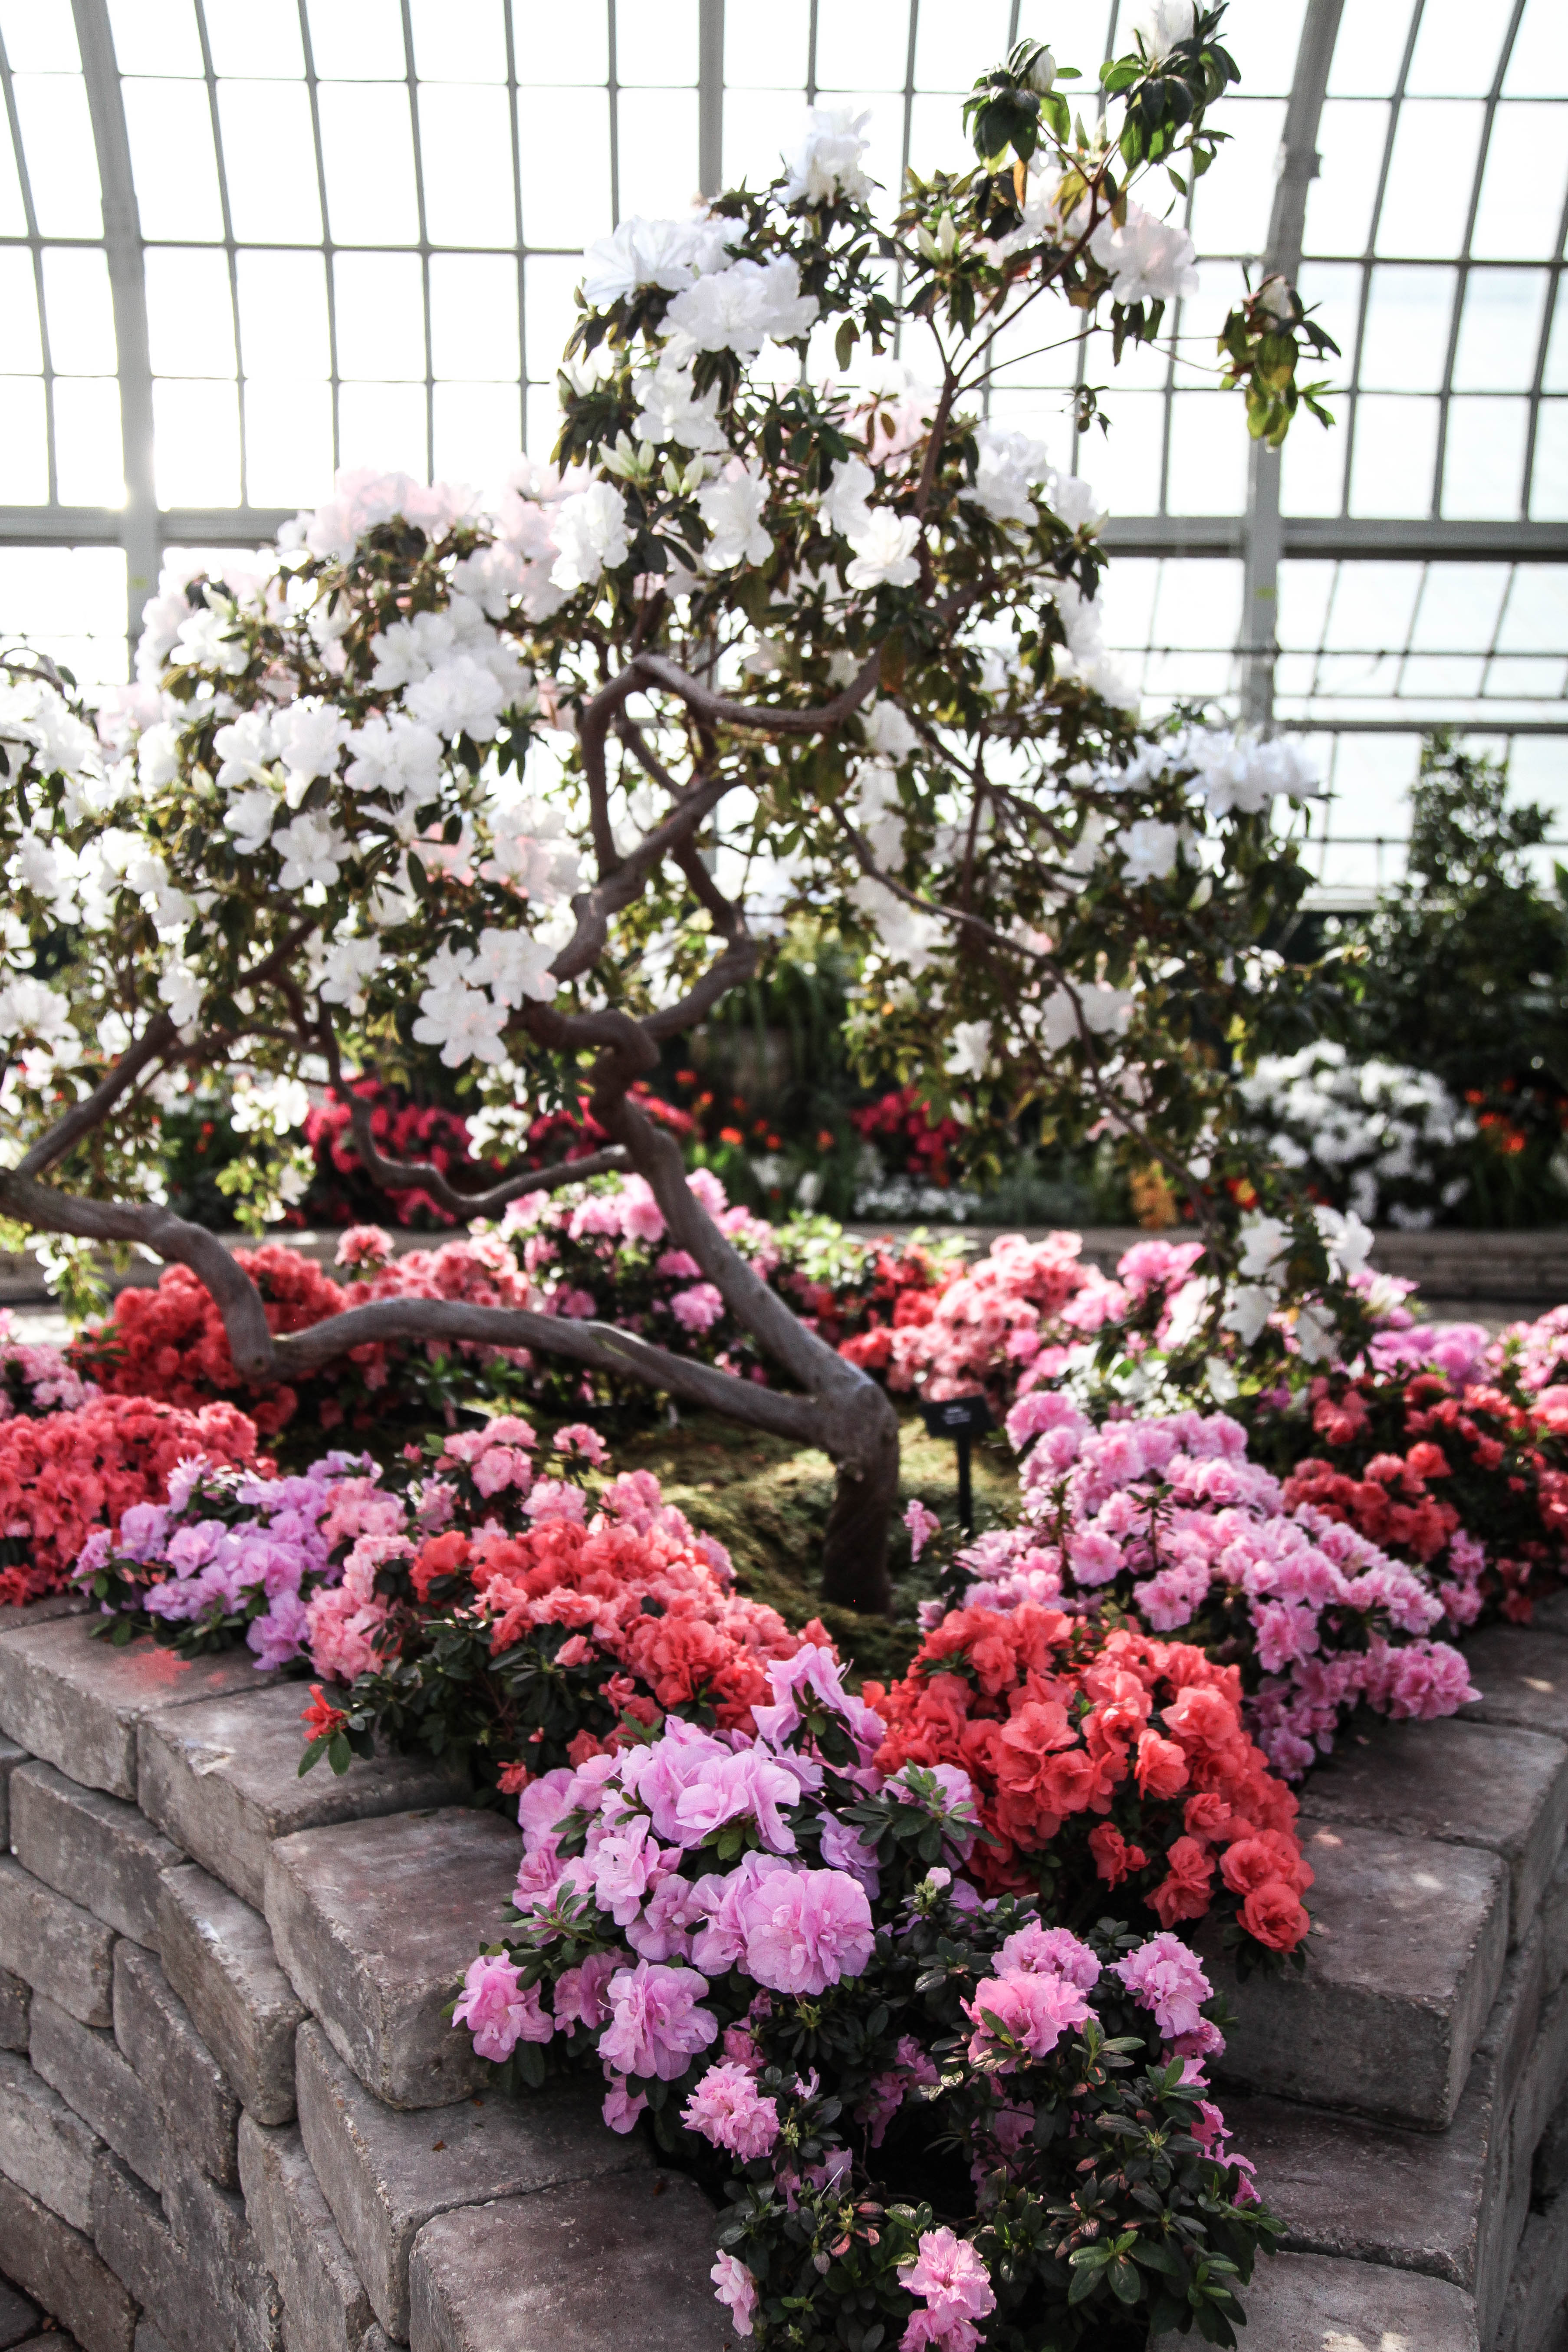 Flowers in full bloom at Garfield Park Conservatory